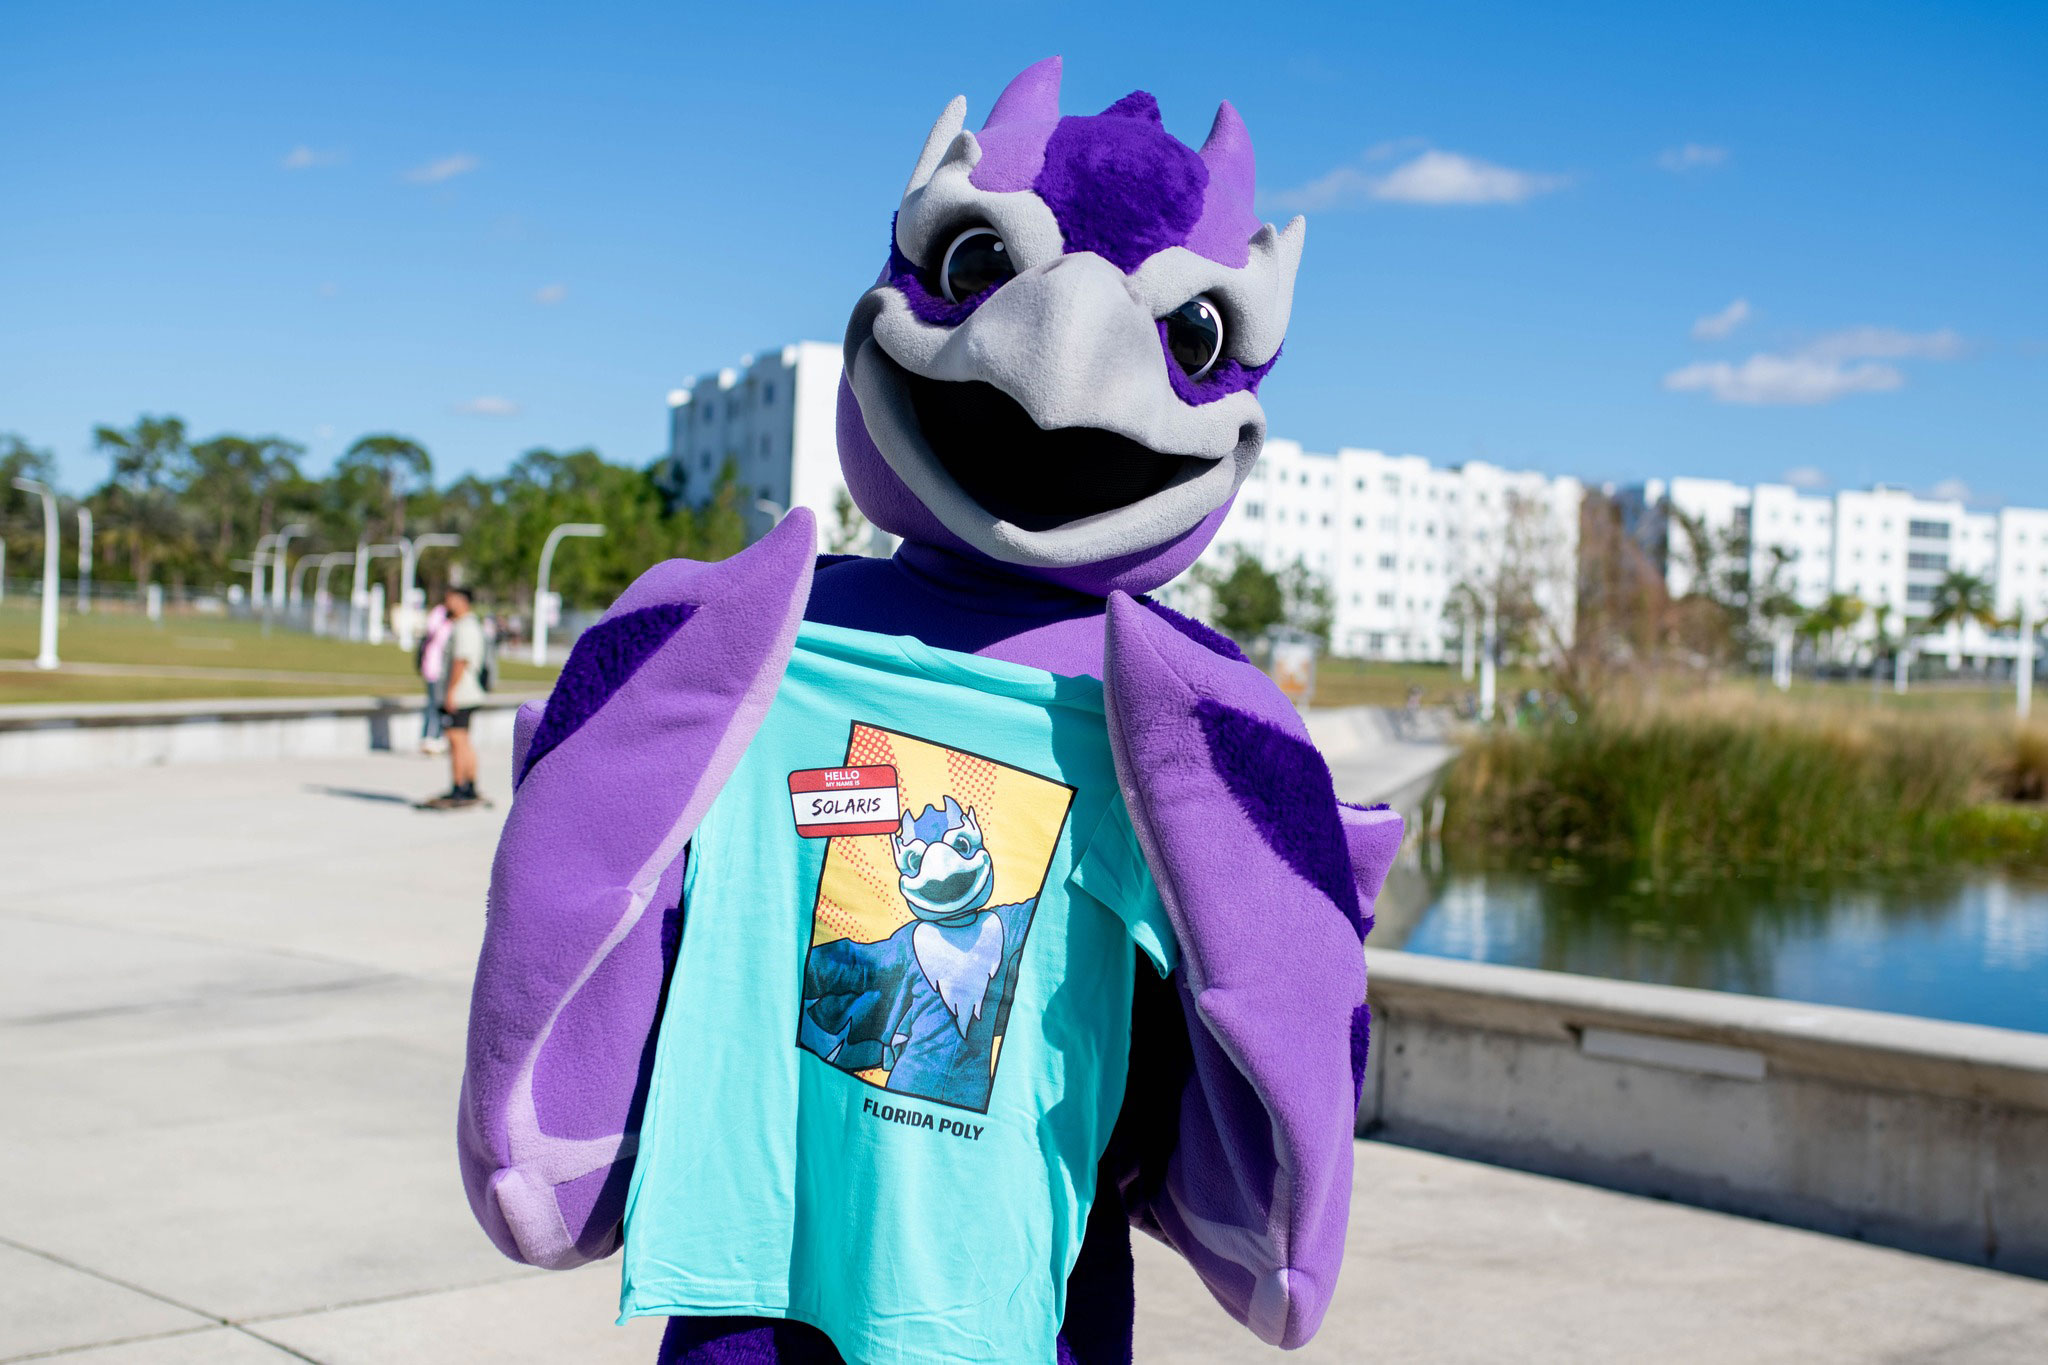 Solaris is the newly named Florida Poly mascot